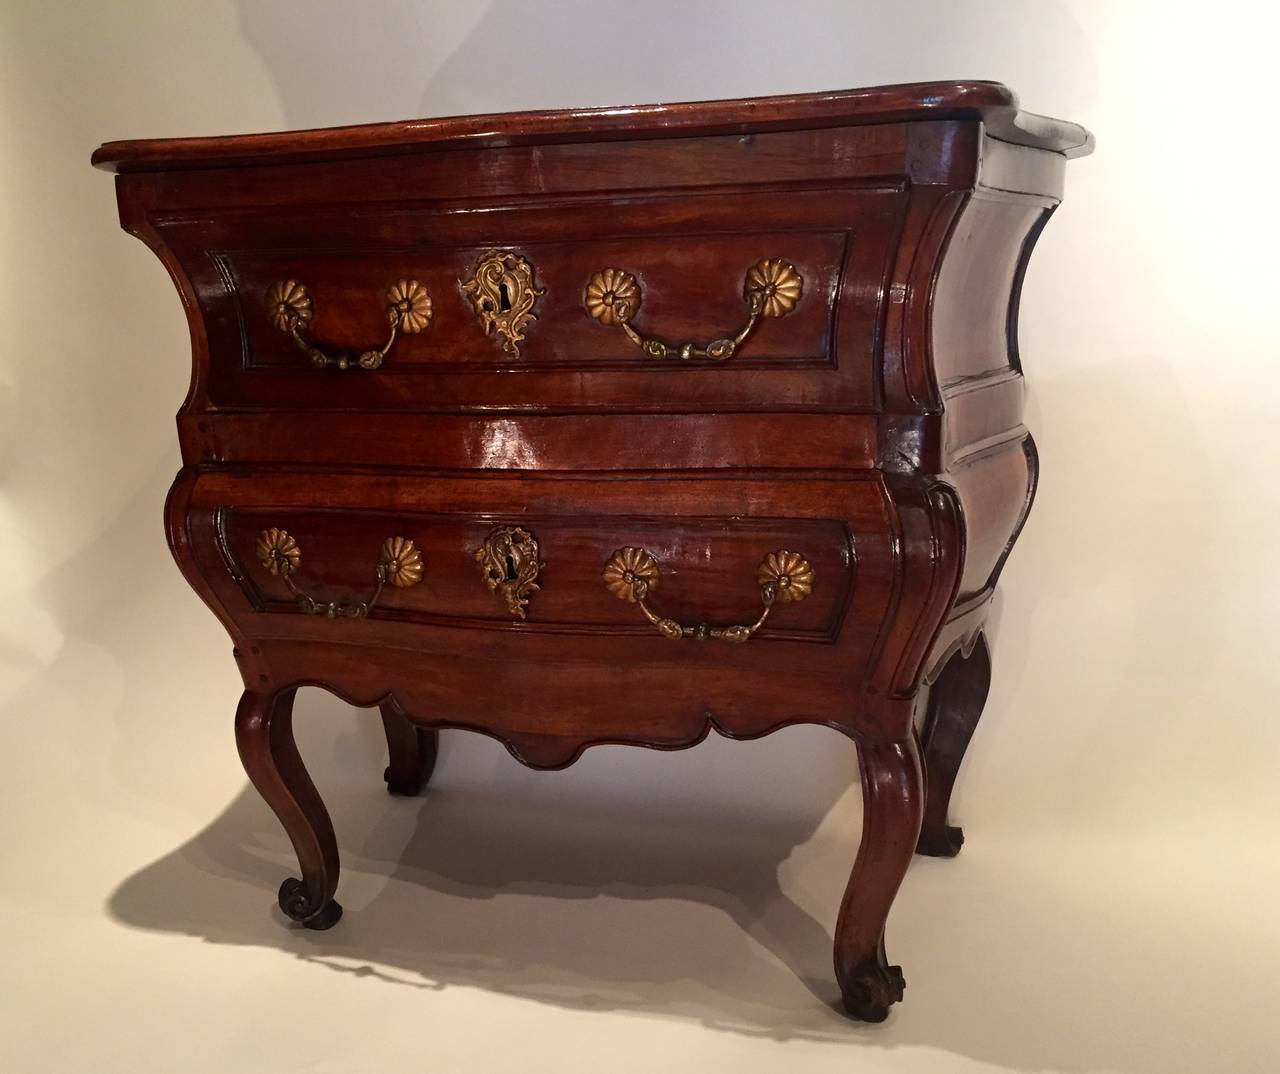 Small french commode, Bordeaux circa 1730
Small chest port, Bordeaux 1730
Small chest of 